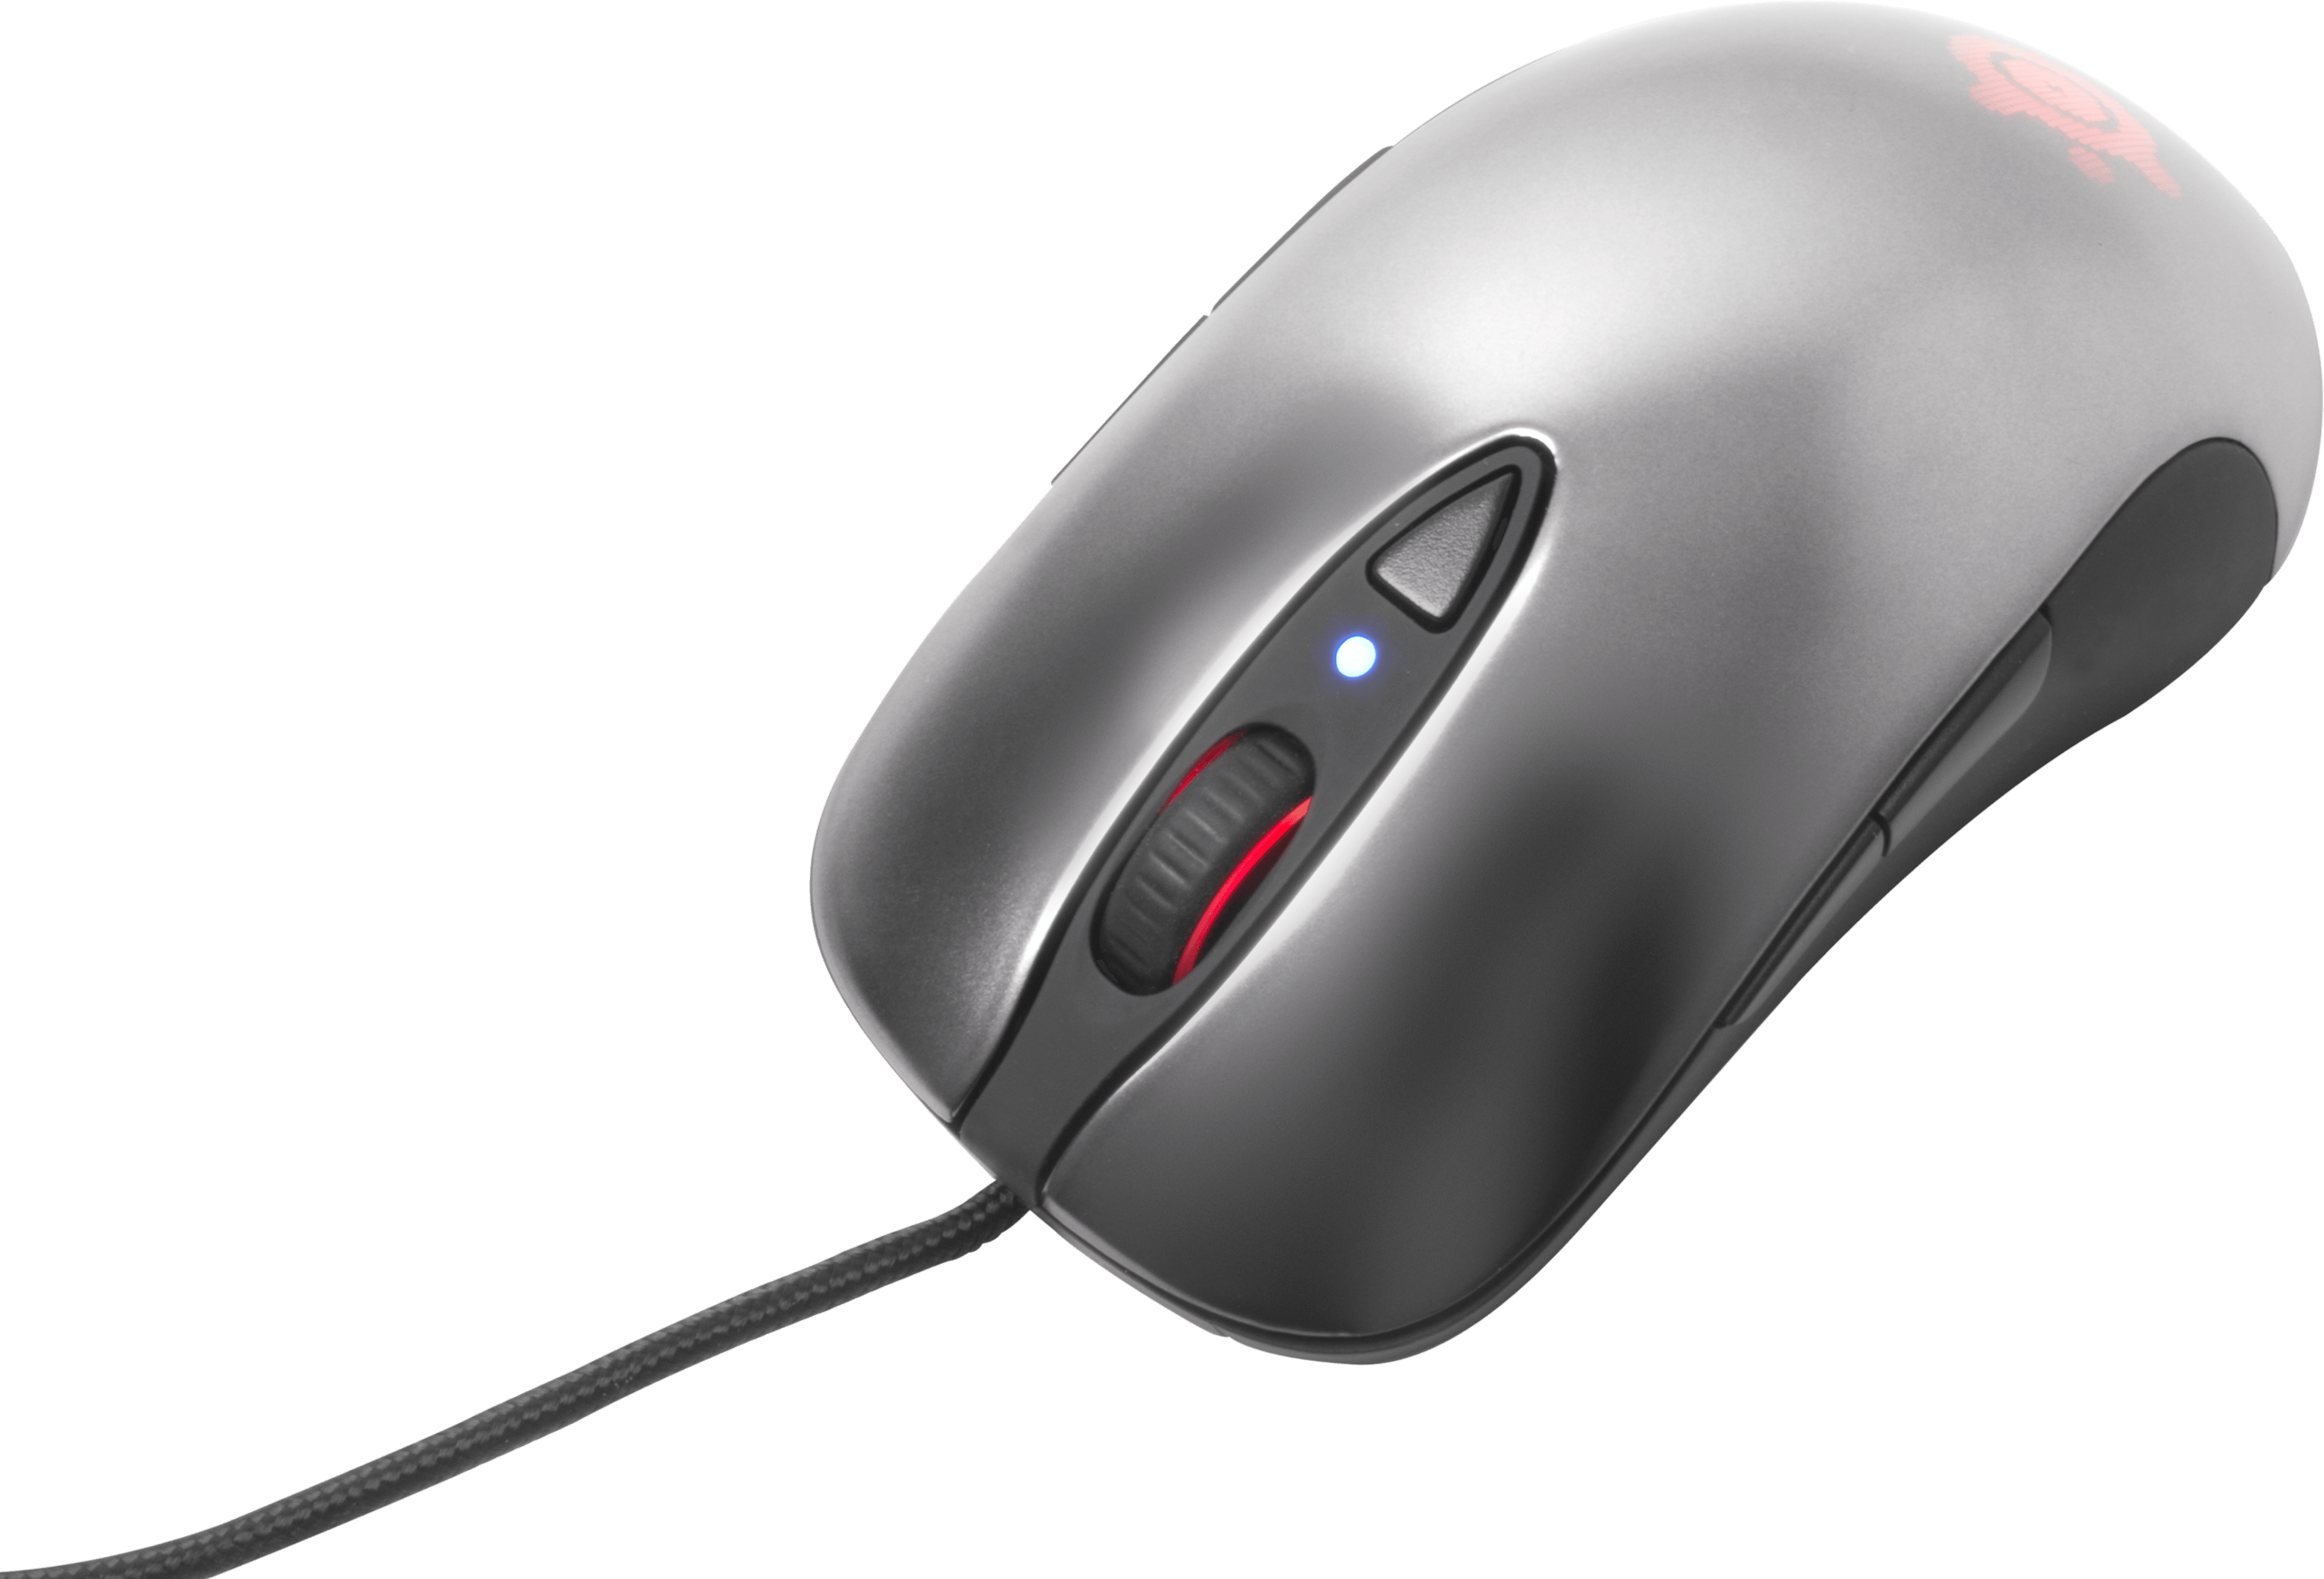 Pc Mouse Png Image PNG Image